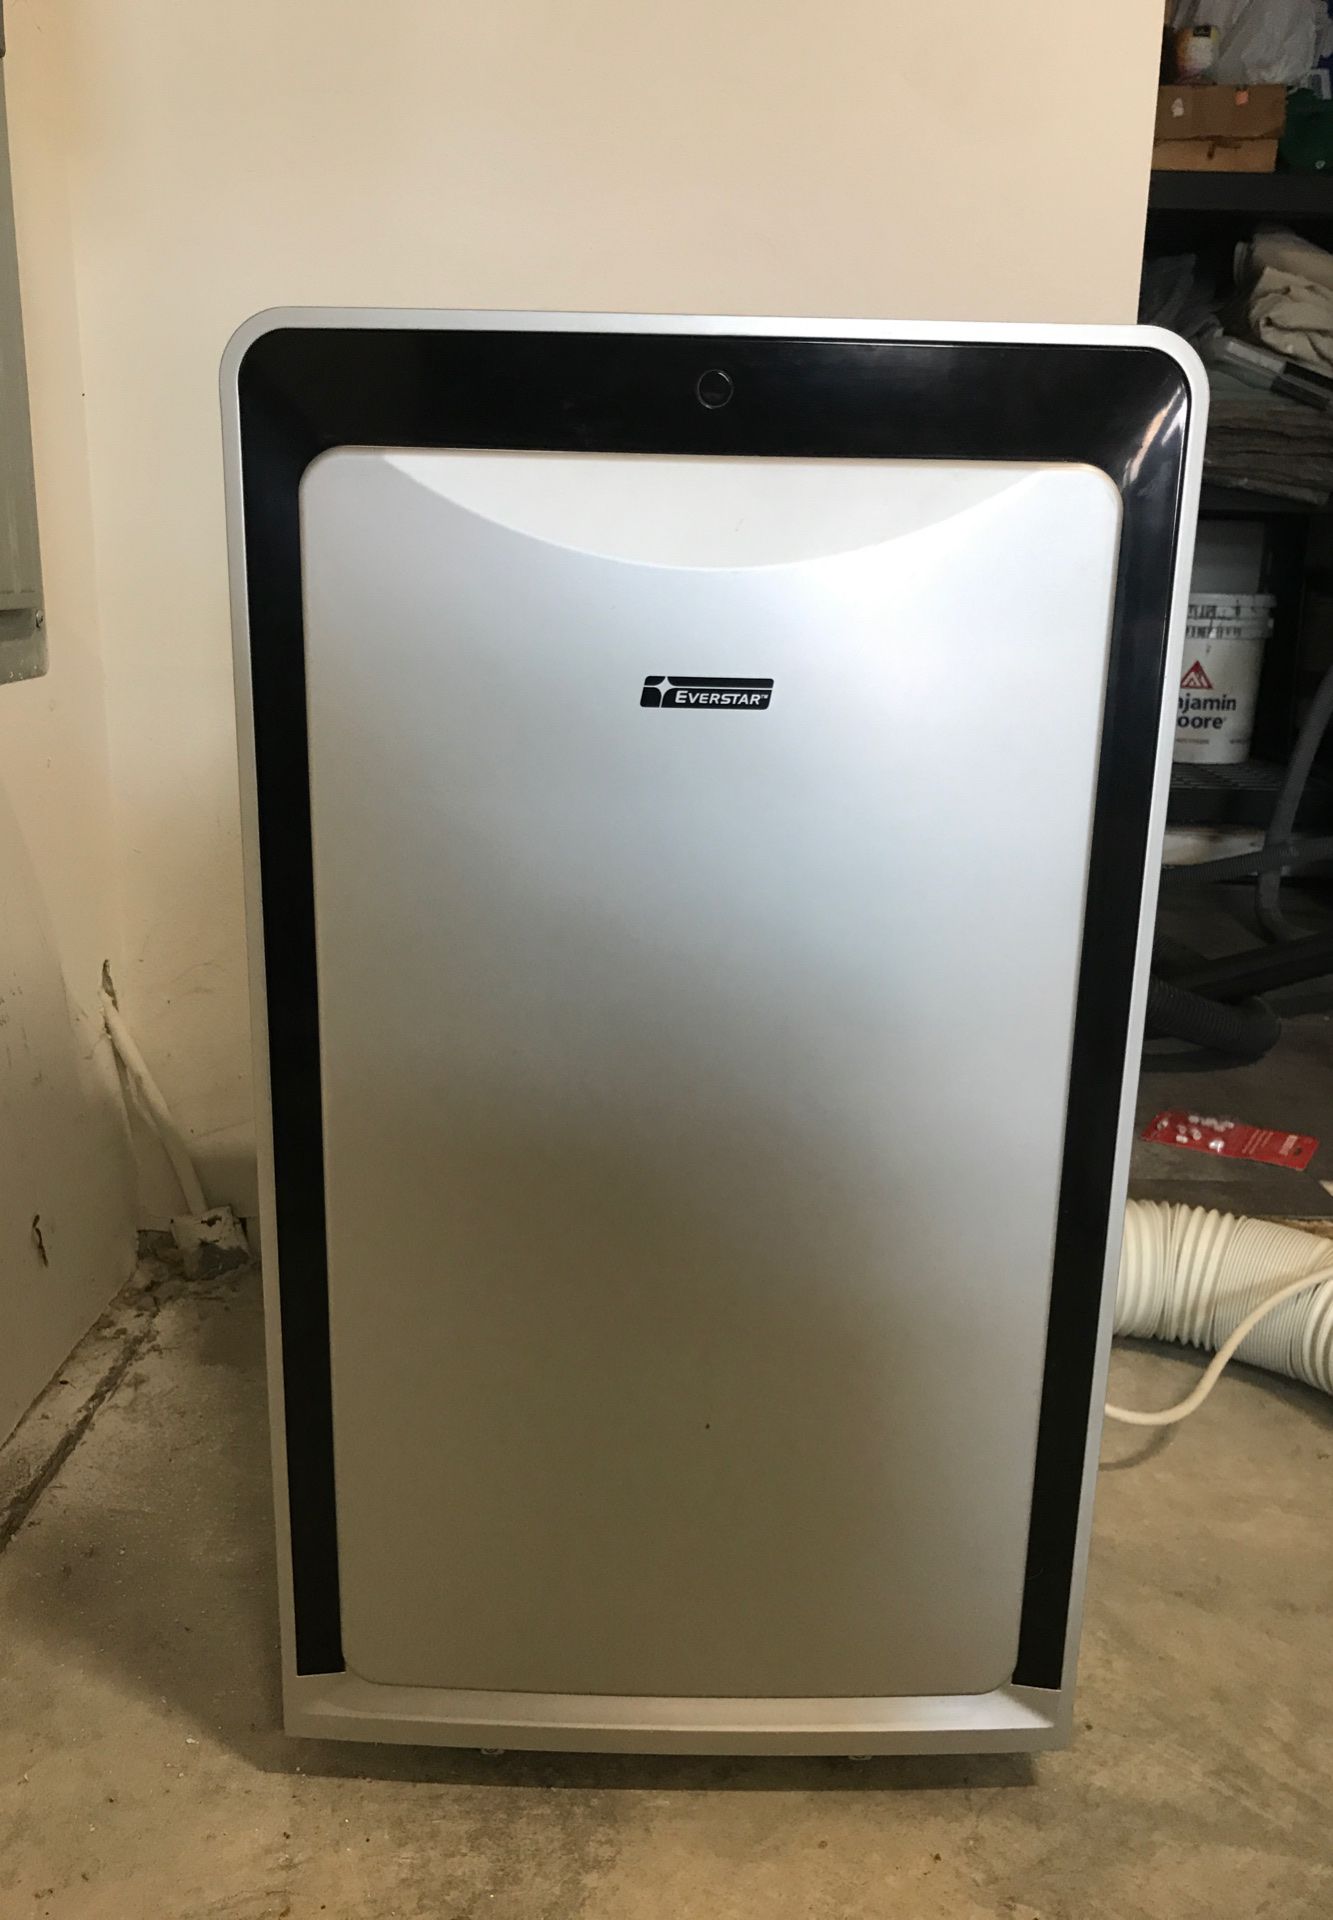 Used Everstar portable Air Conditioner model MPM1-10CR-BB6. Excellent condition!